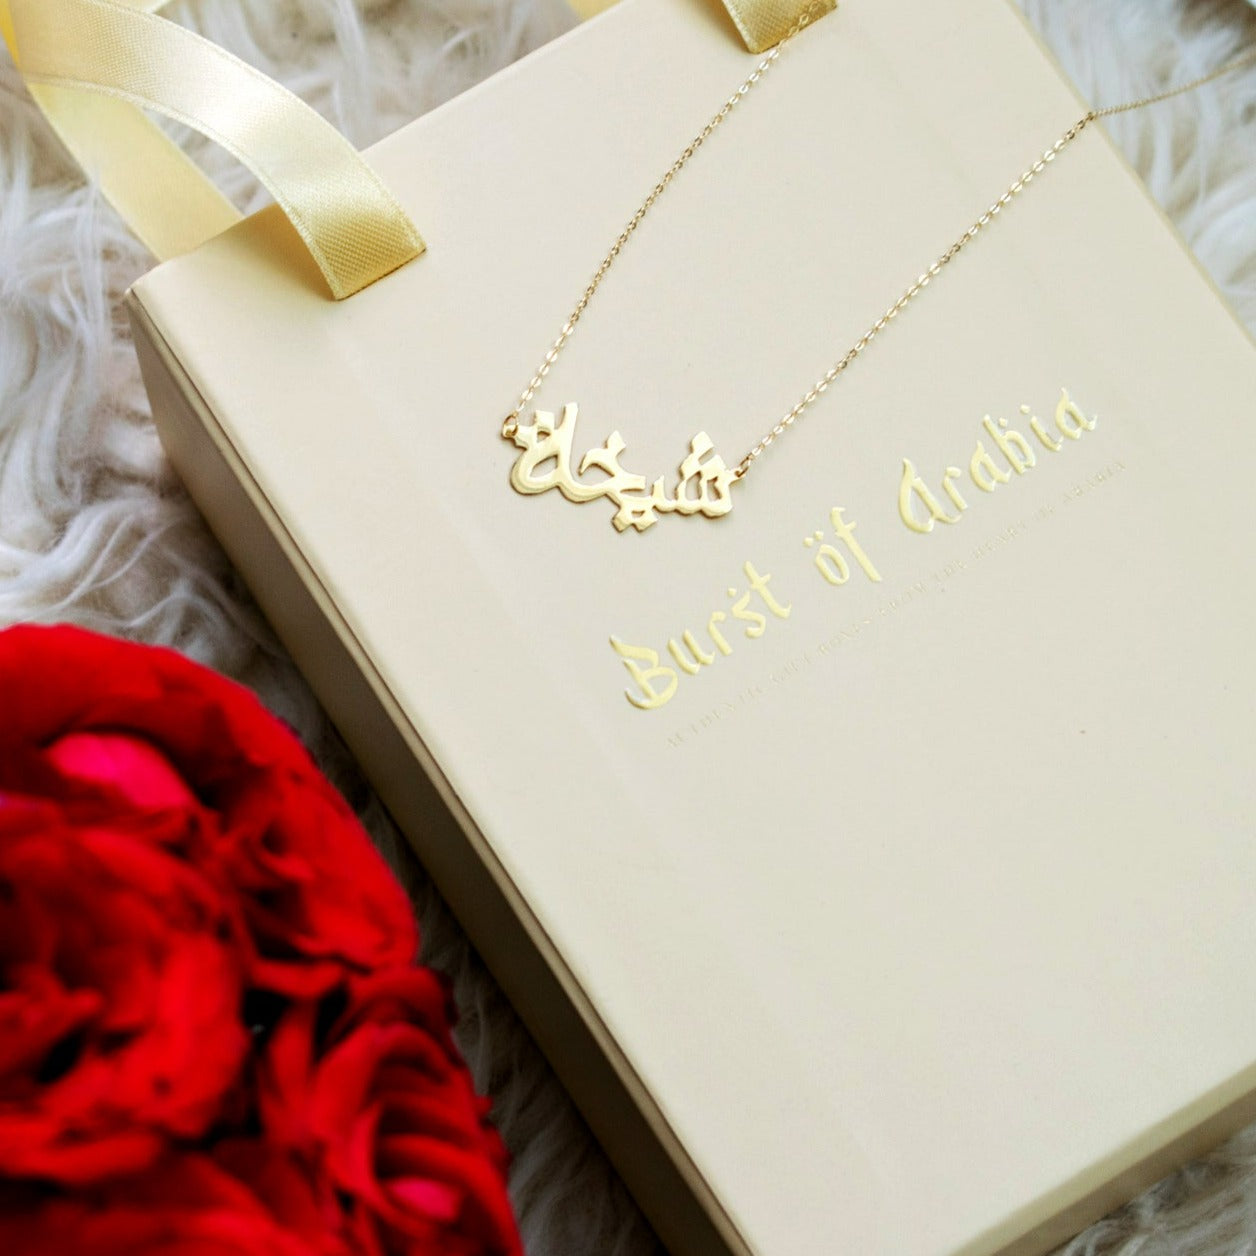 18 carat gold Initial birthstone necklace Customized gifts in Dubai, Abu Dhabi, UAE Order personalized jewelry for women Luxury gift for wife birthday gift for girlfriend anniversary gifts for her.